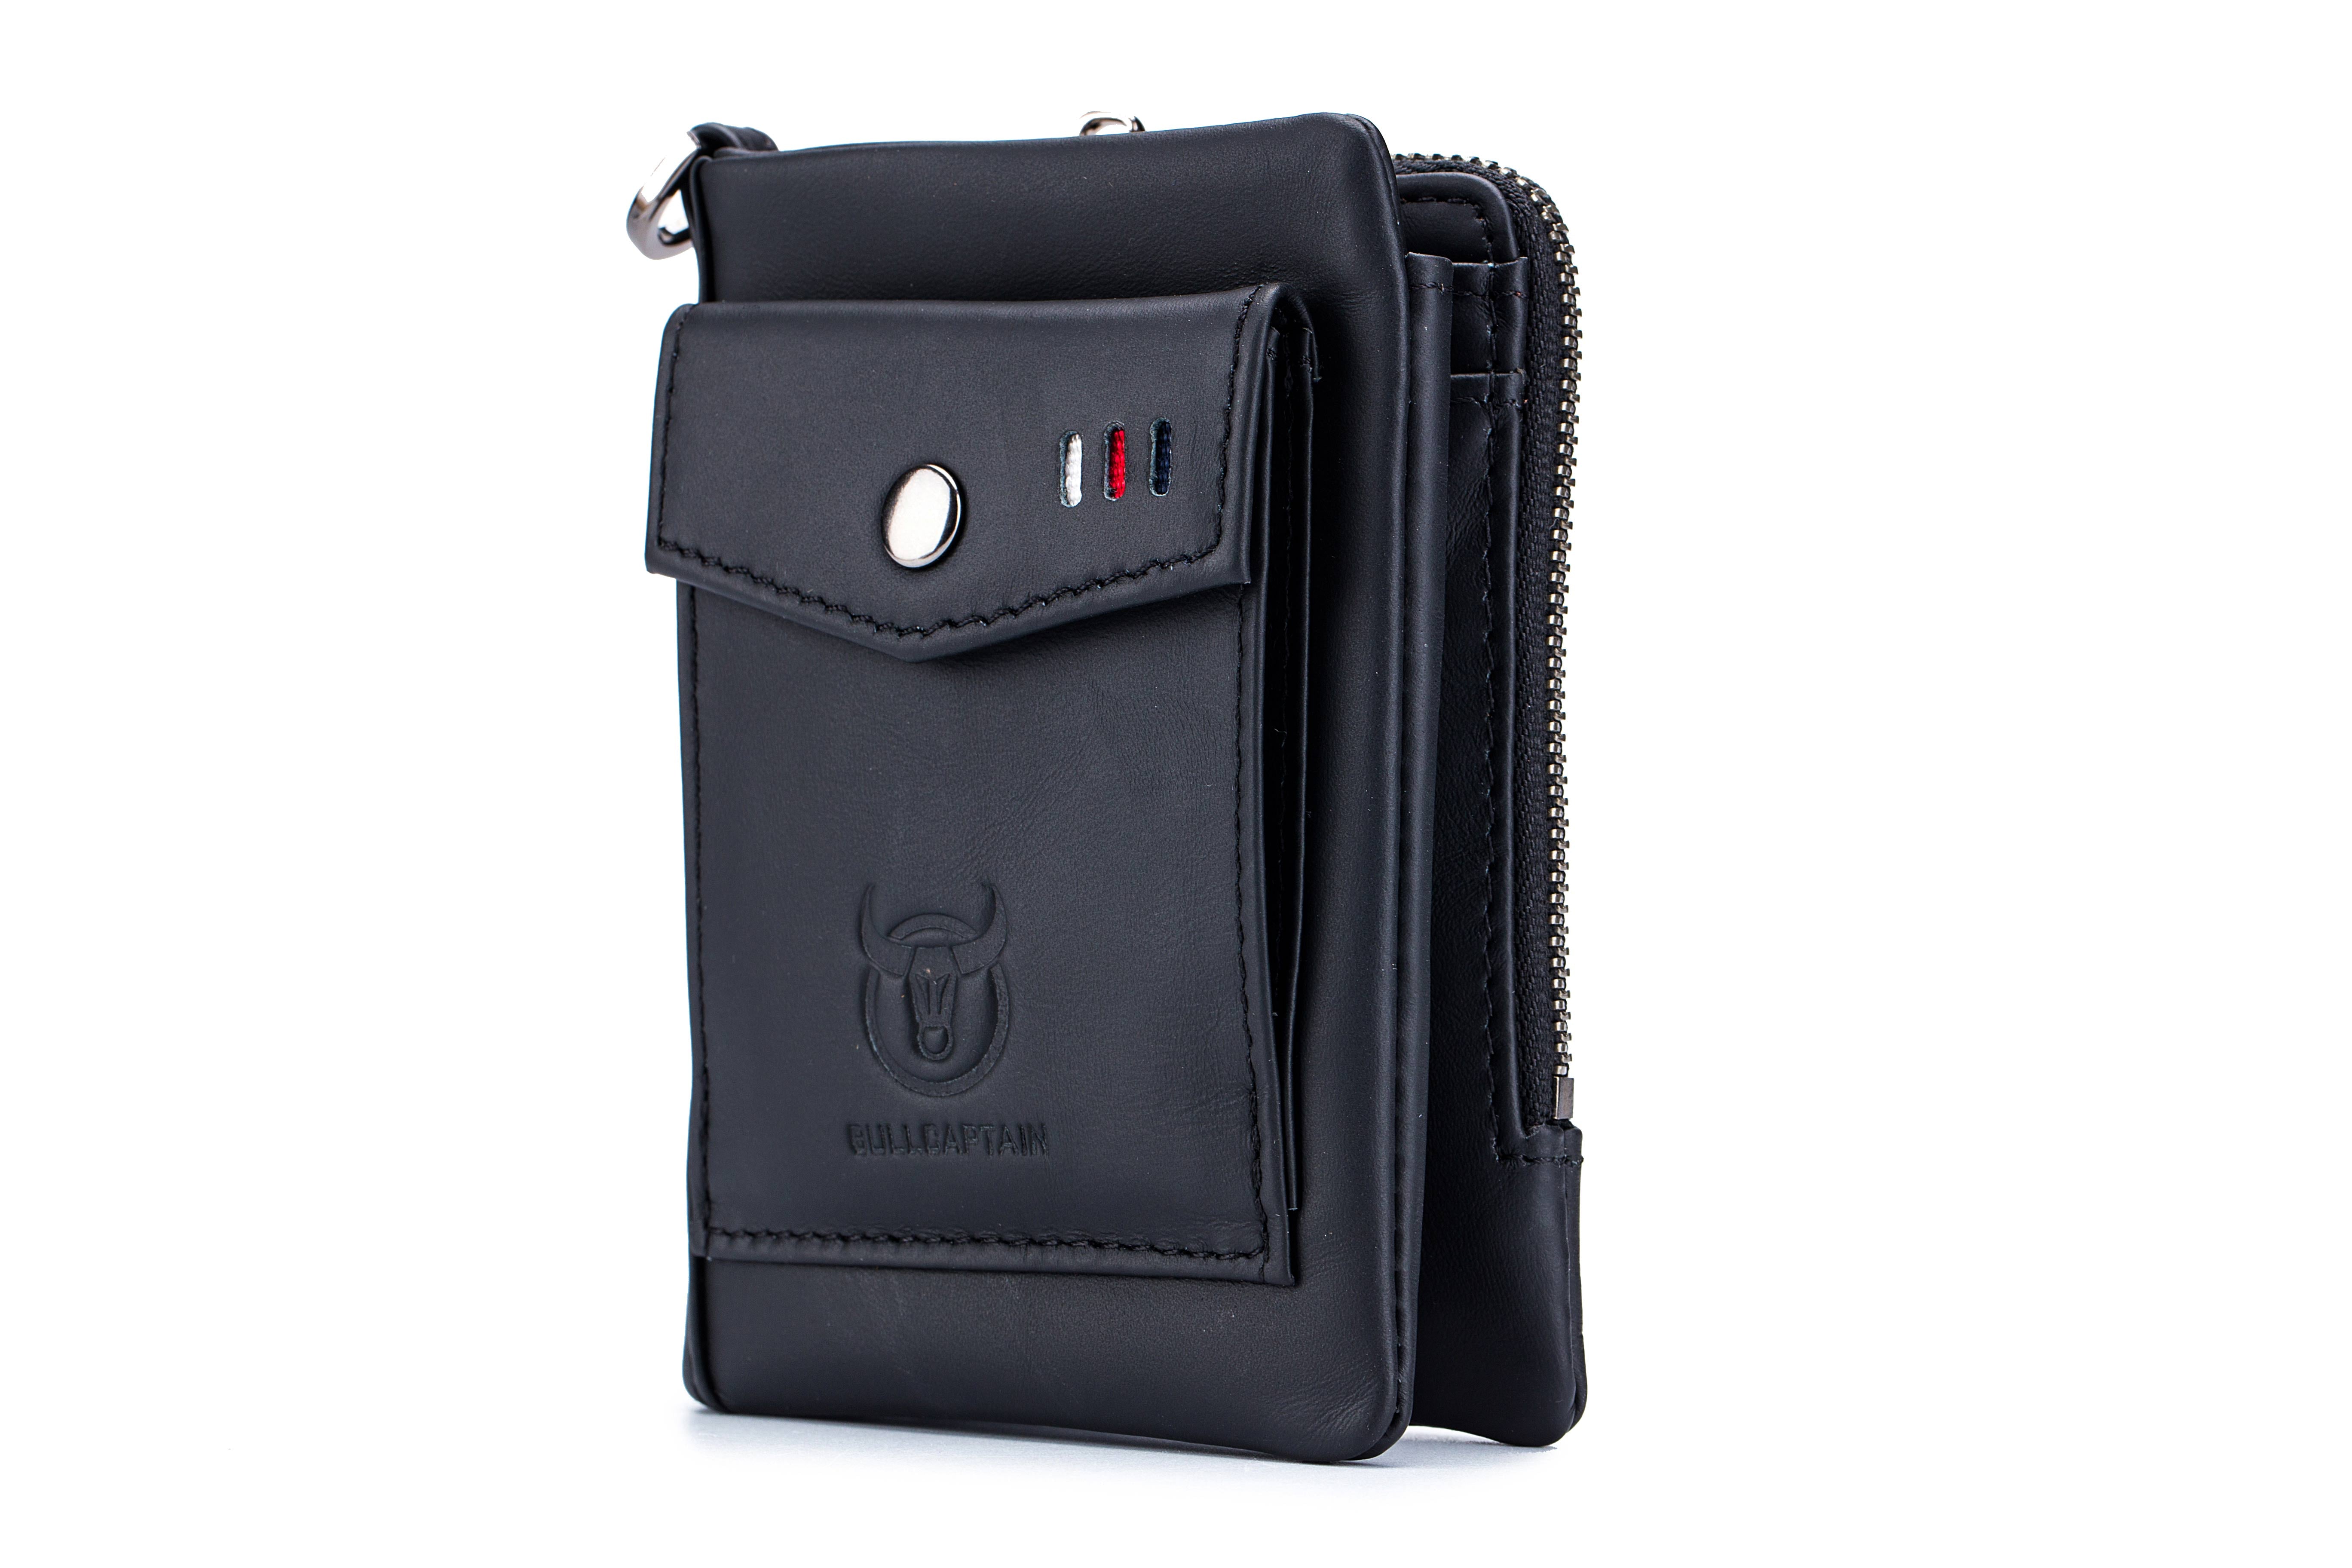 Bullcaptain Leather Biflod Rfid Blocking Men Wallet Minimalist with Zipper Coin Pocket and Hasp Pocket - 057